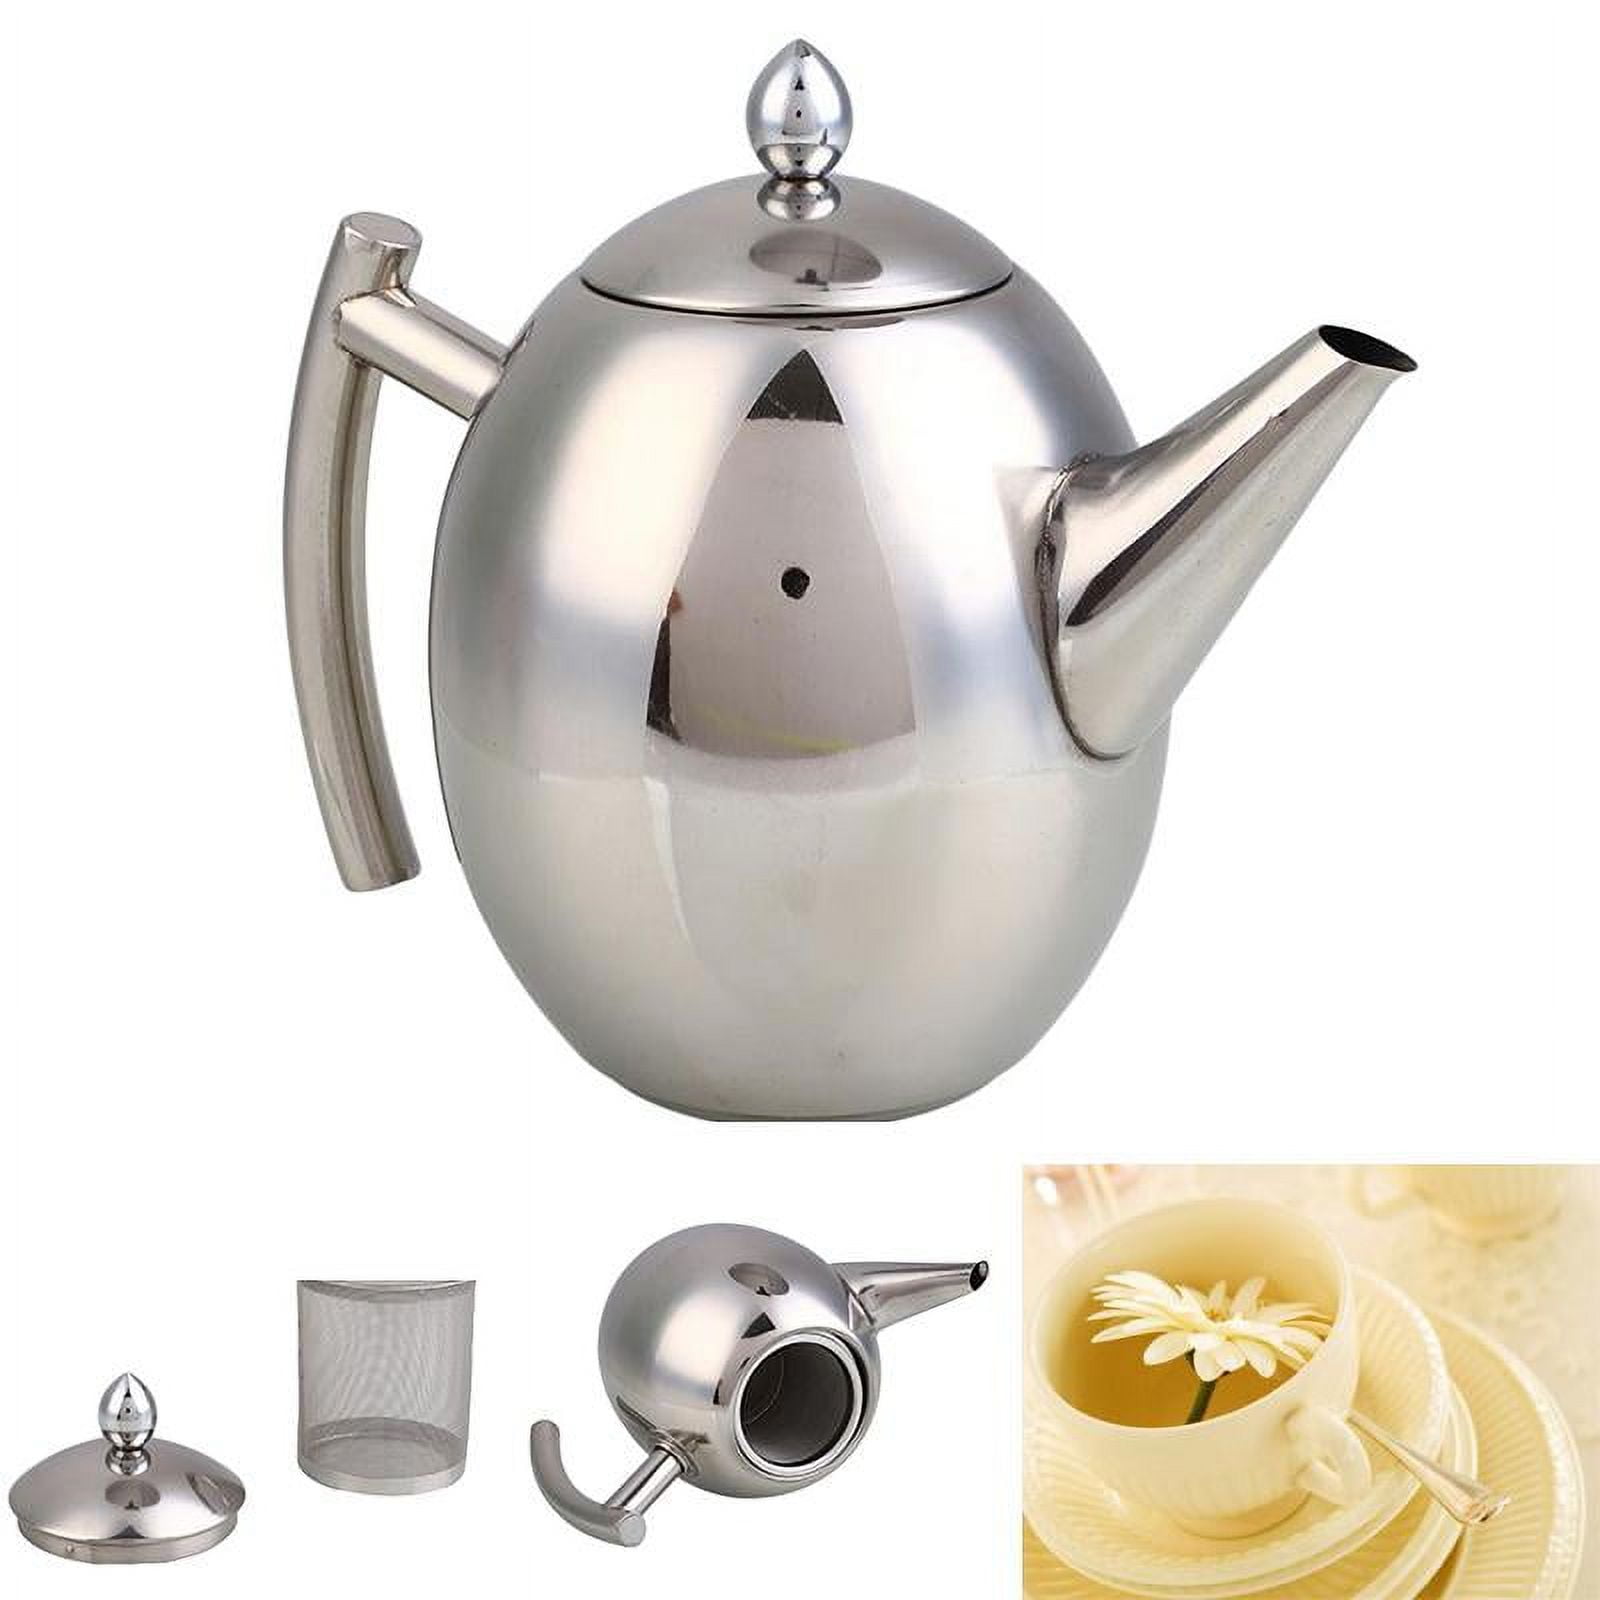 Tea Pot, Satin Polish Stainless Steel Insulated Teapot Coffee Tea Kettle  Pot with Lid, Teapot Coffee Pouring Pot with Tea Infuser Strainer, Mirror  Finish, 35 Oz/1 Liter 